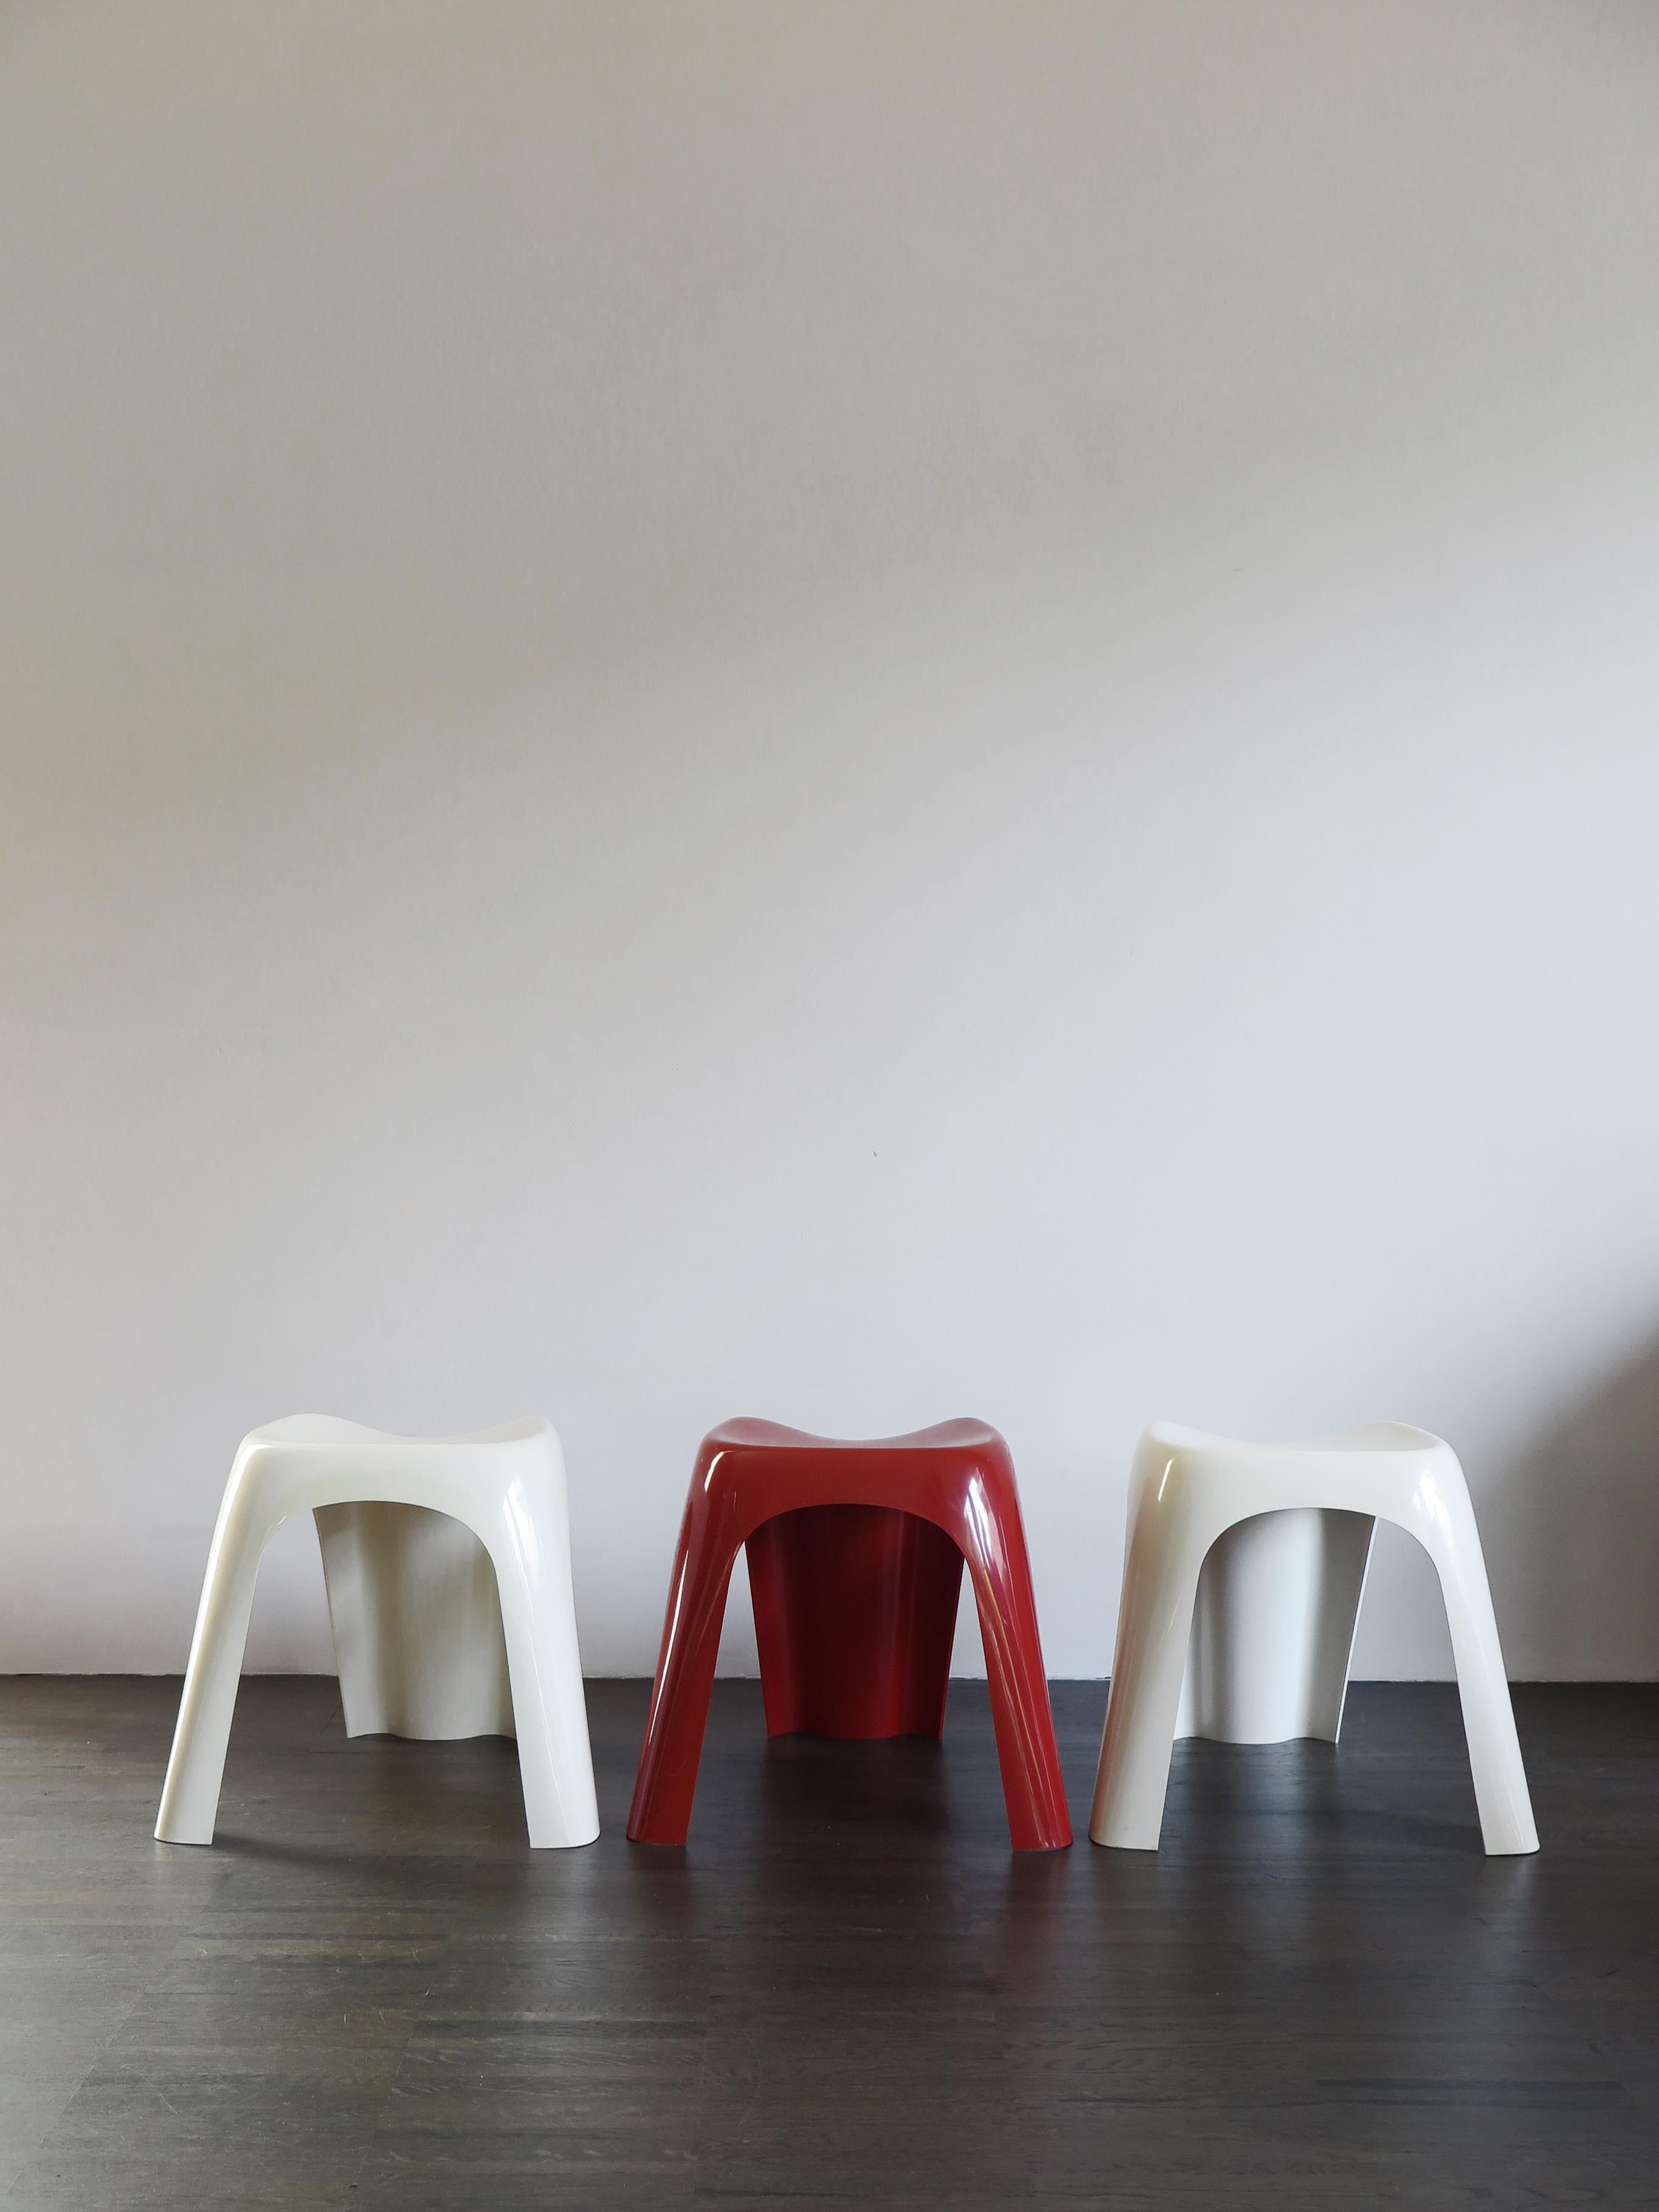 Set of three stackable plastic stools model “Stucki” design Giorgina Castiglioni for Bilumen, 
signature under the seat “Bilumen Stucki Giorgina Castiglioni”, 1970s.

Please note that the litems are original of the period and this shows normal